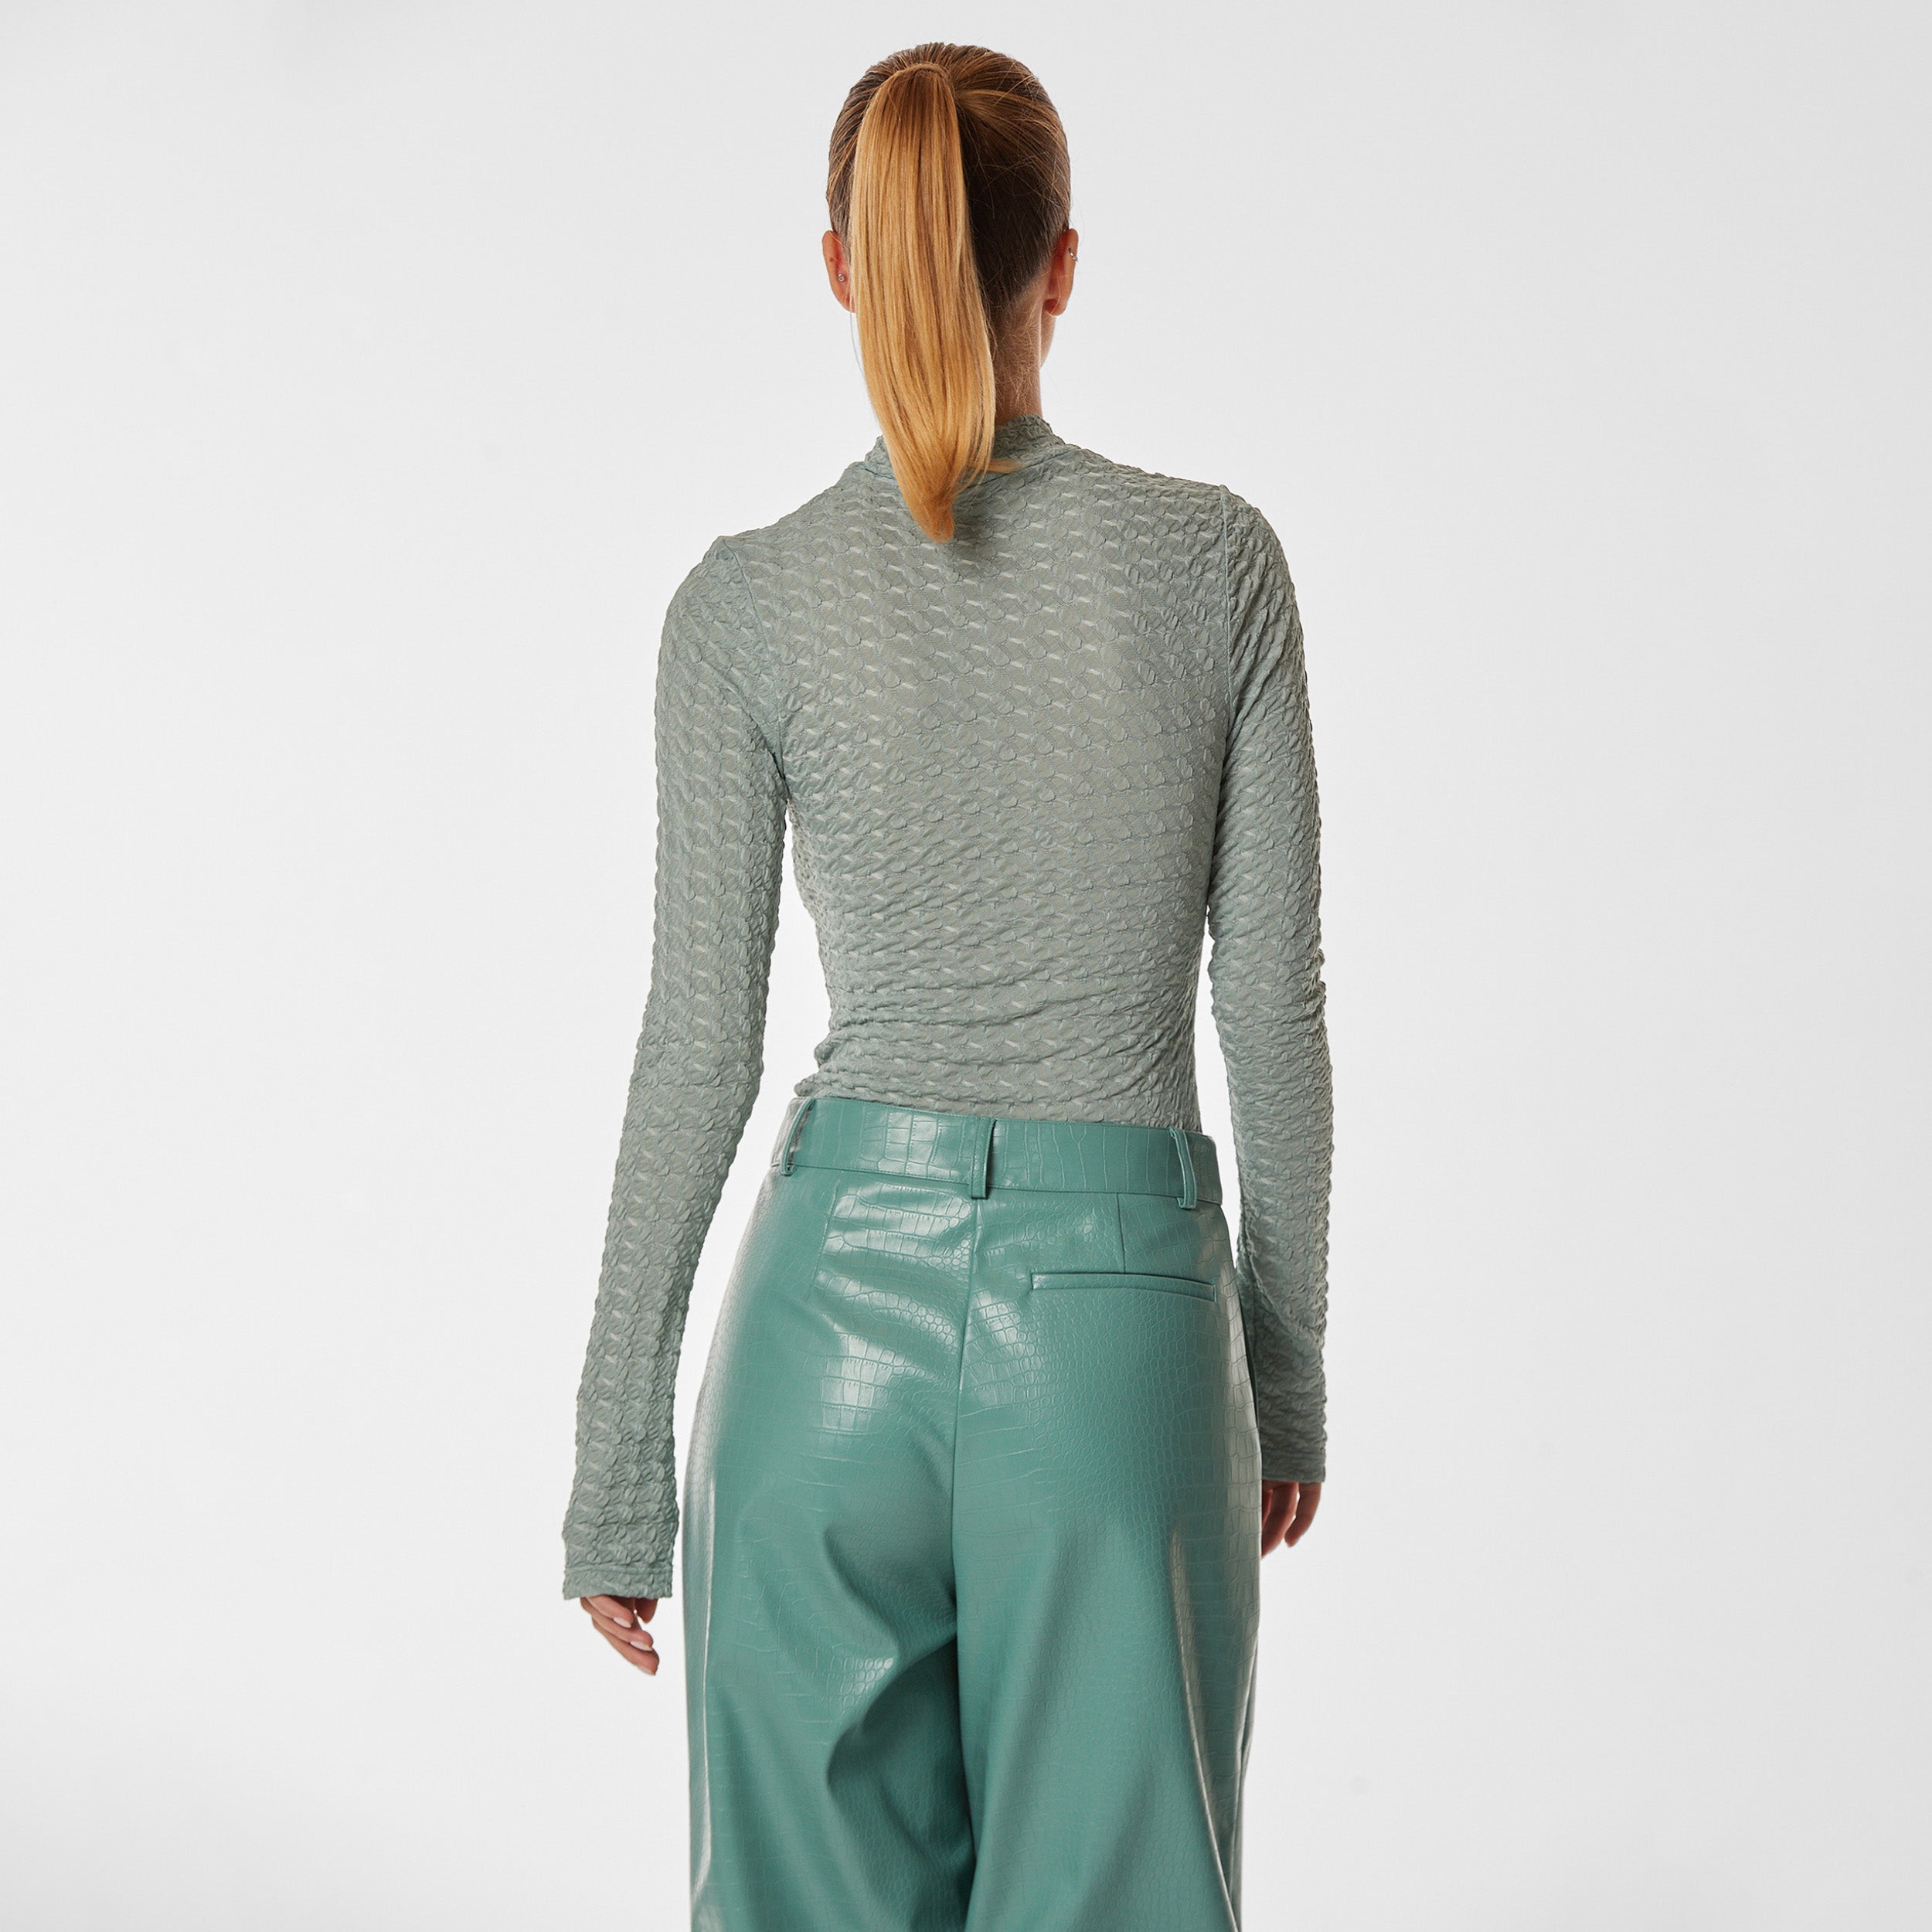 Rear view of woman wearing green stretch mesh textured turtleneck sweater